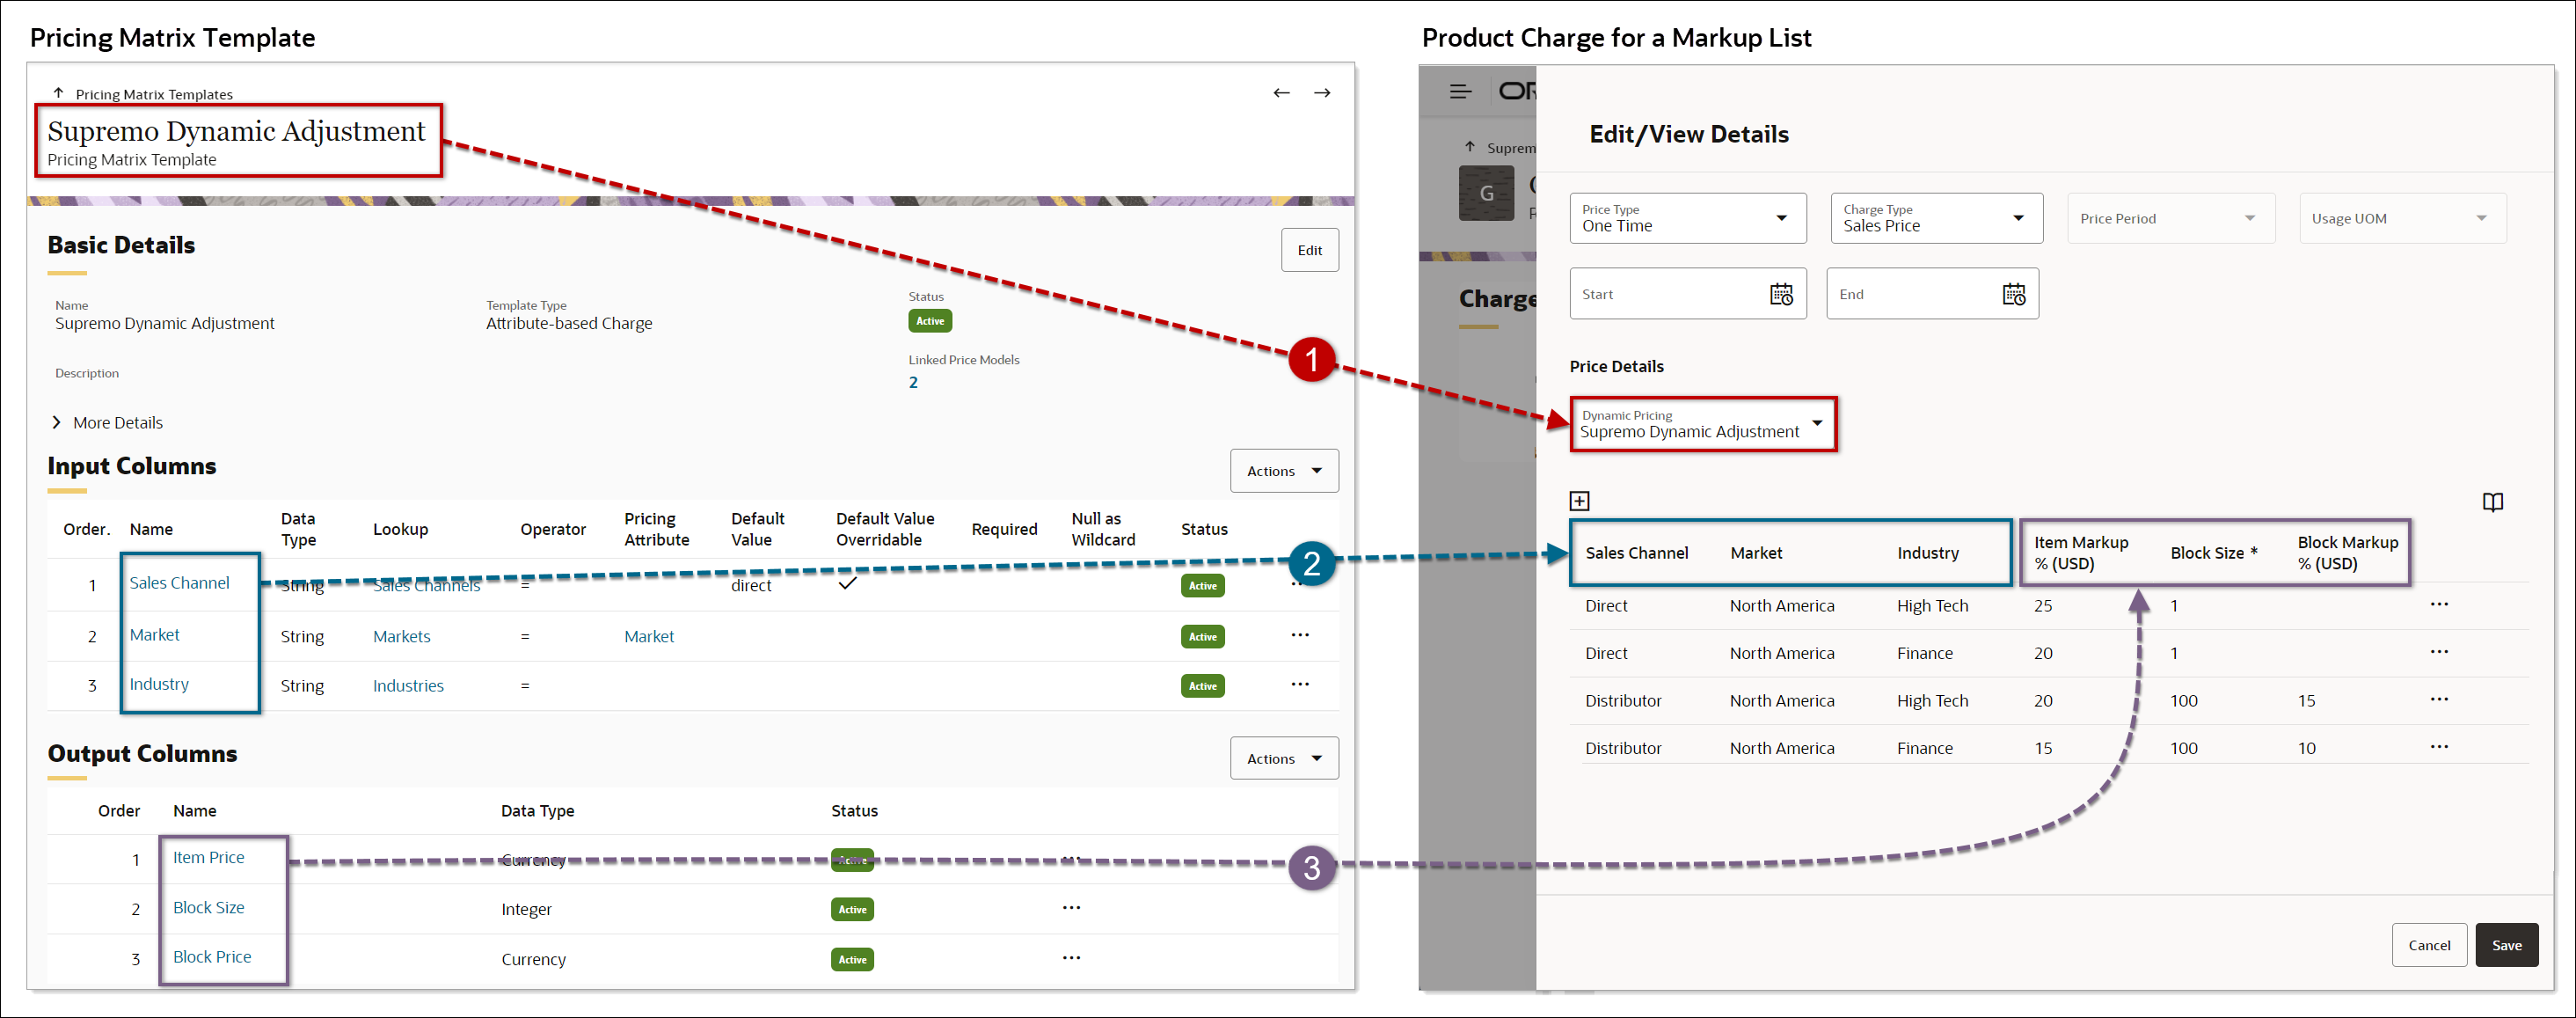 Pricing Matrix Template - Product Charge Relationship